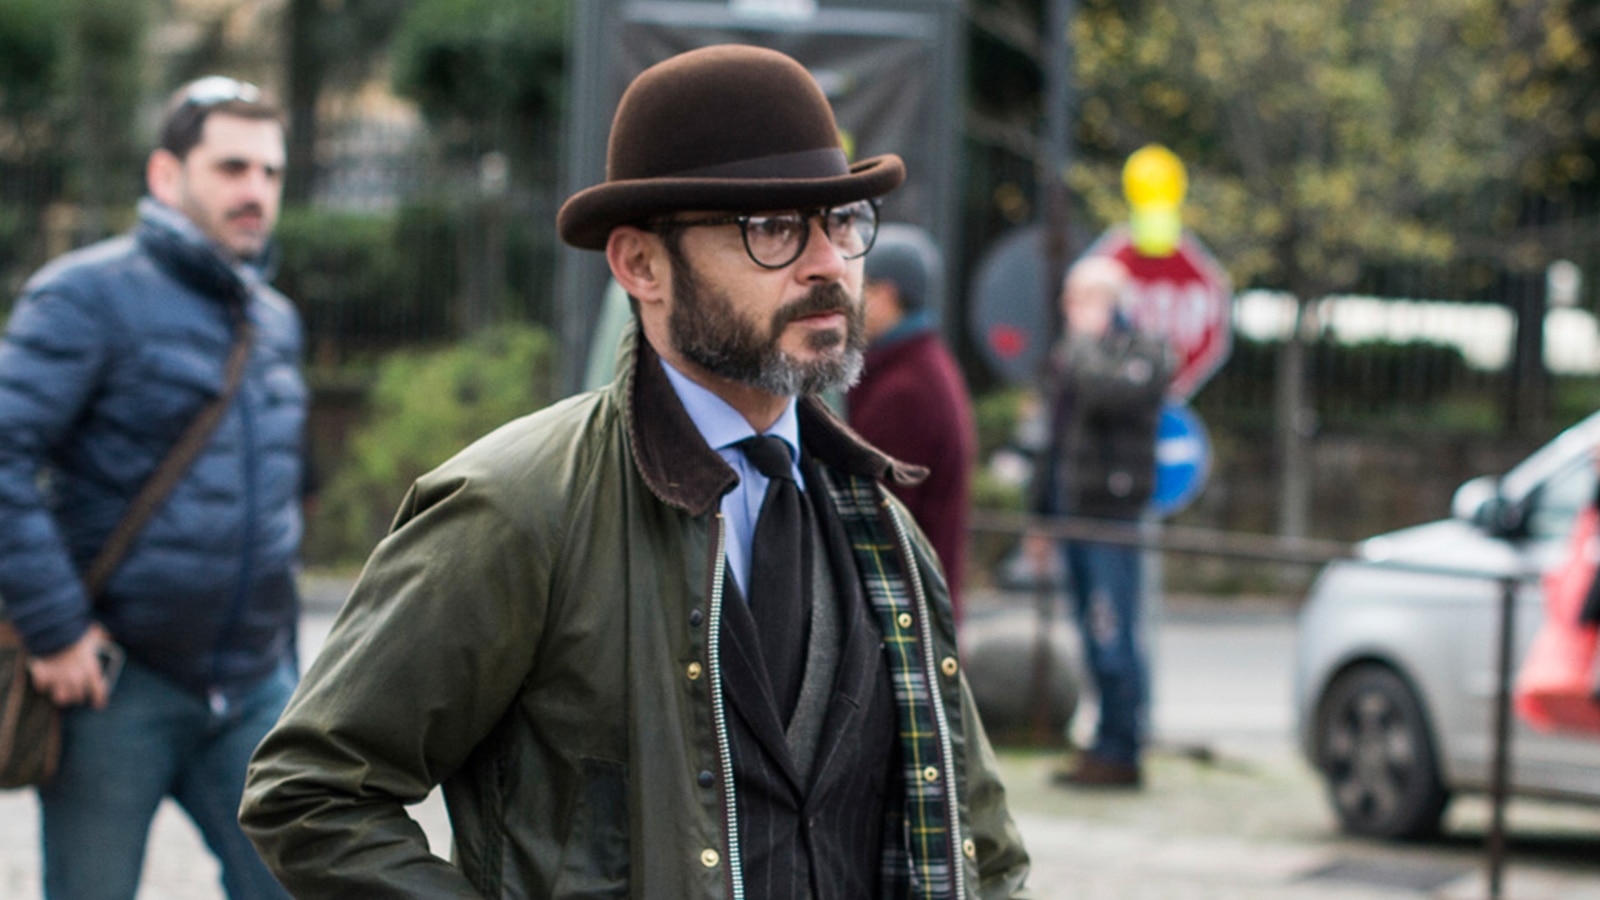 Is The Bowler Hat Making A Comeback? | The Journal | MR PORTER